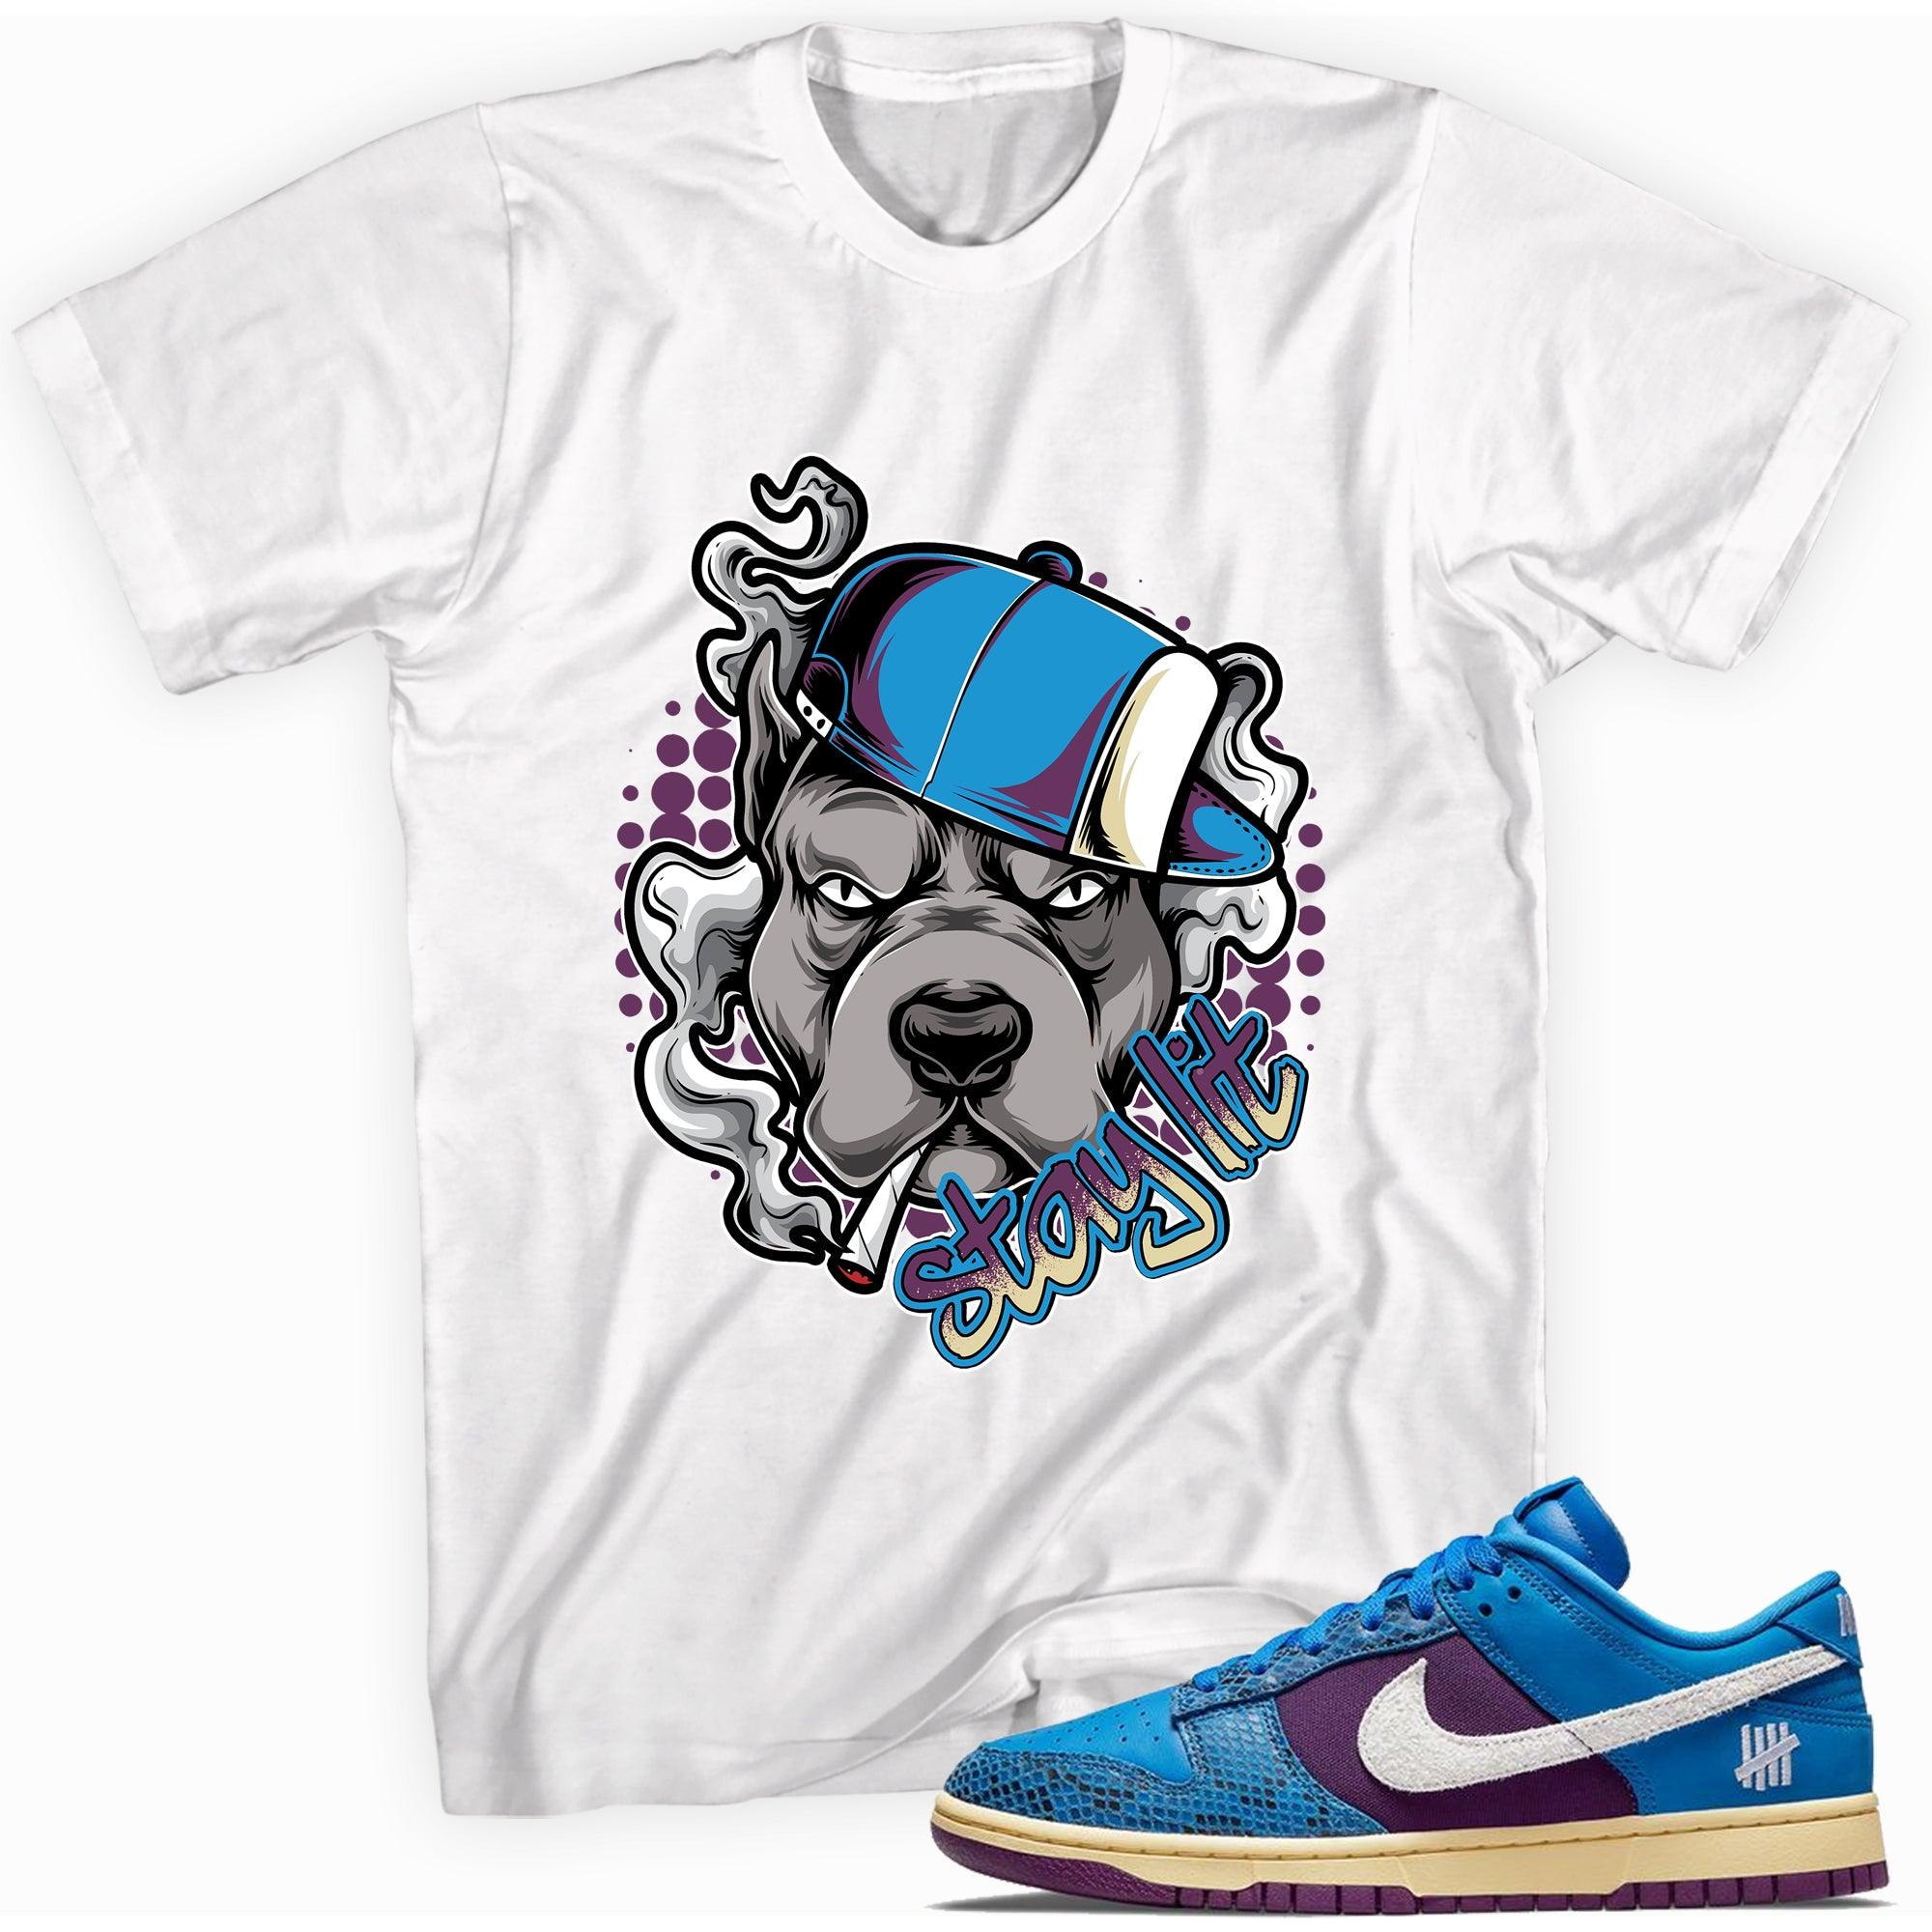 Stay Lit Shirt Nike Dunk Low Undefeated 5 On It Dunk vs AF1 photo